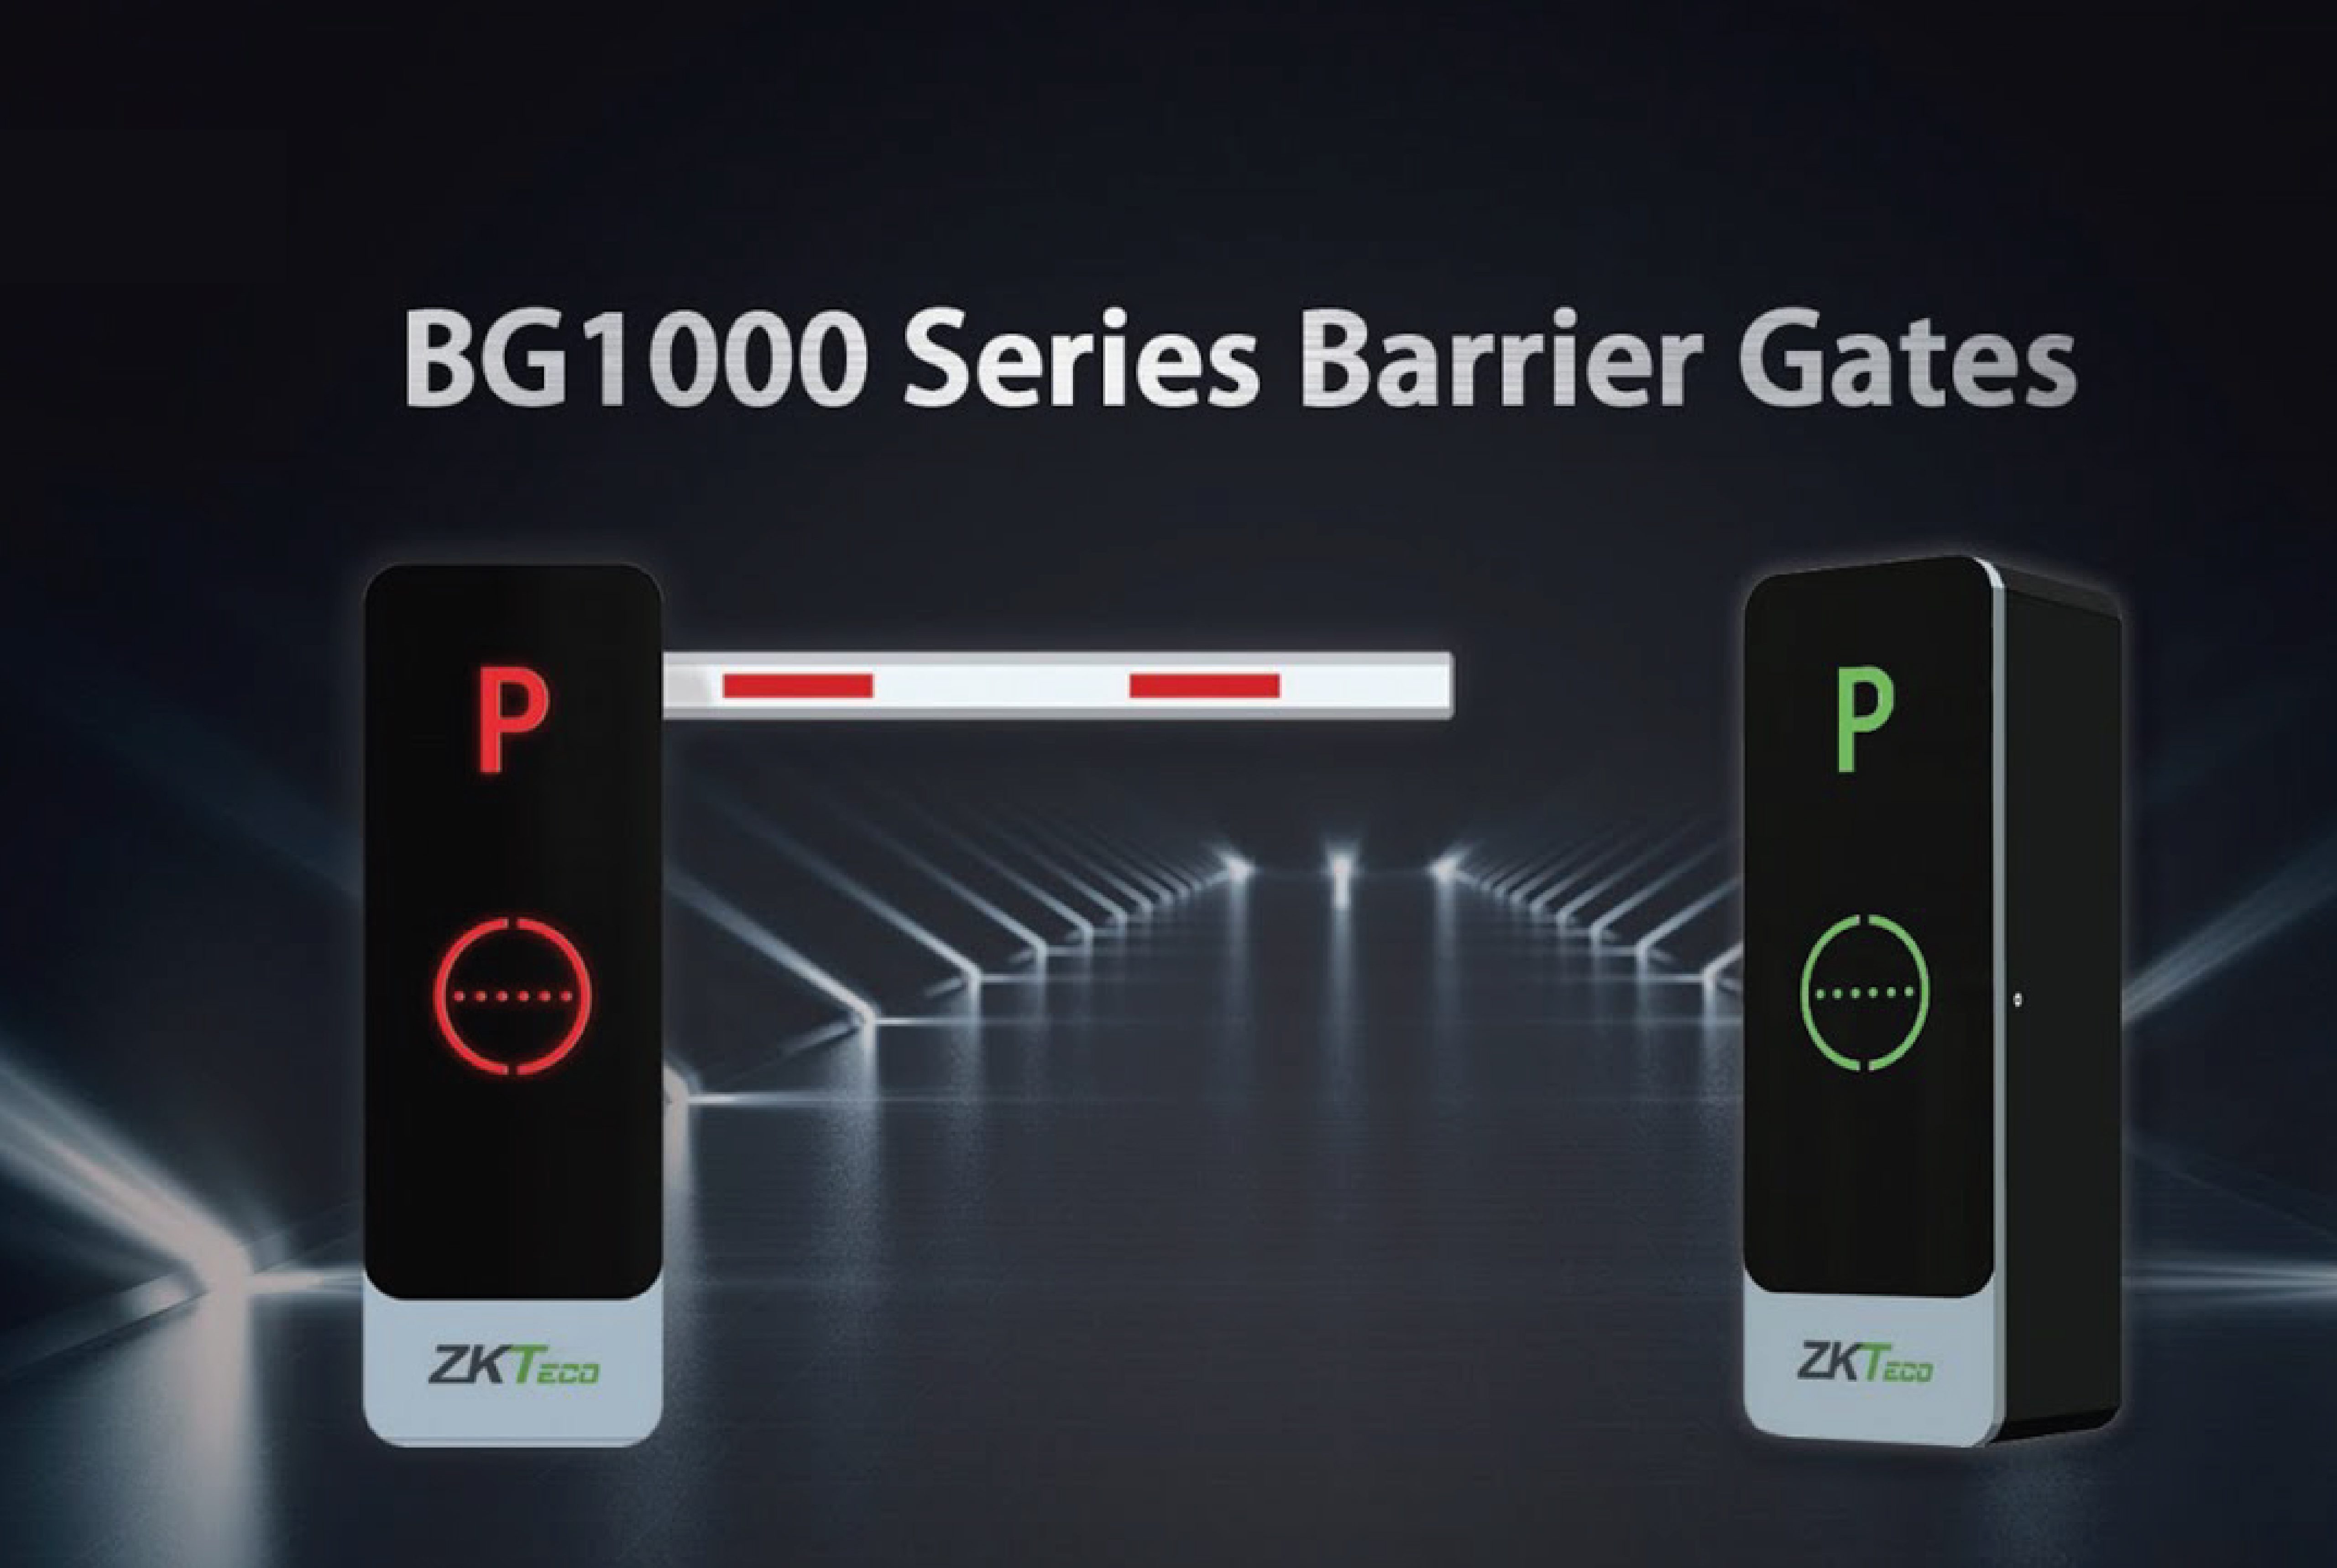 ZKTeco BG1000- Time and attendance biometric solutions, Access Control systemsSecurity Solutions, Smart locks and Video surveillance systems.